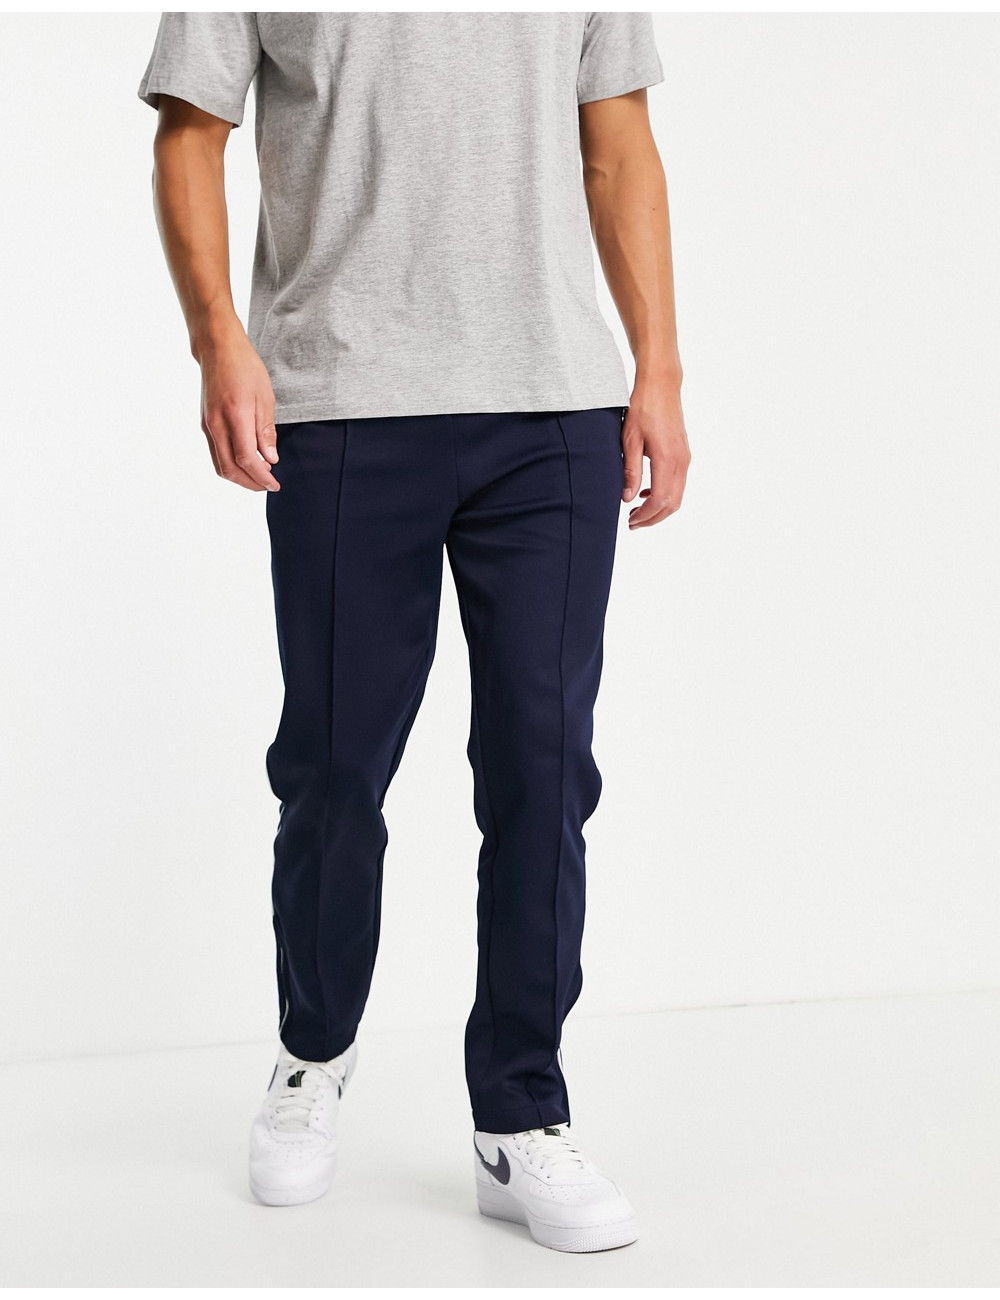 Lacoste Sport track trousers